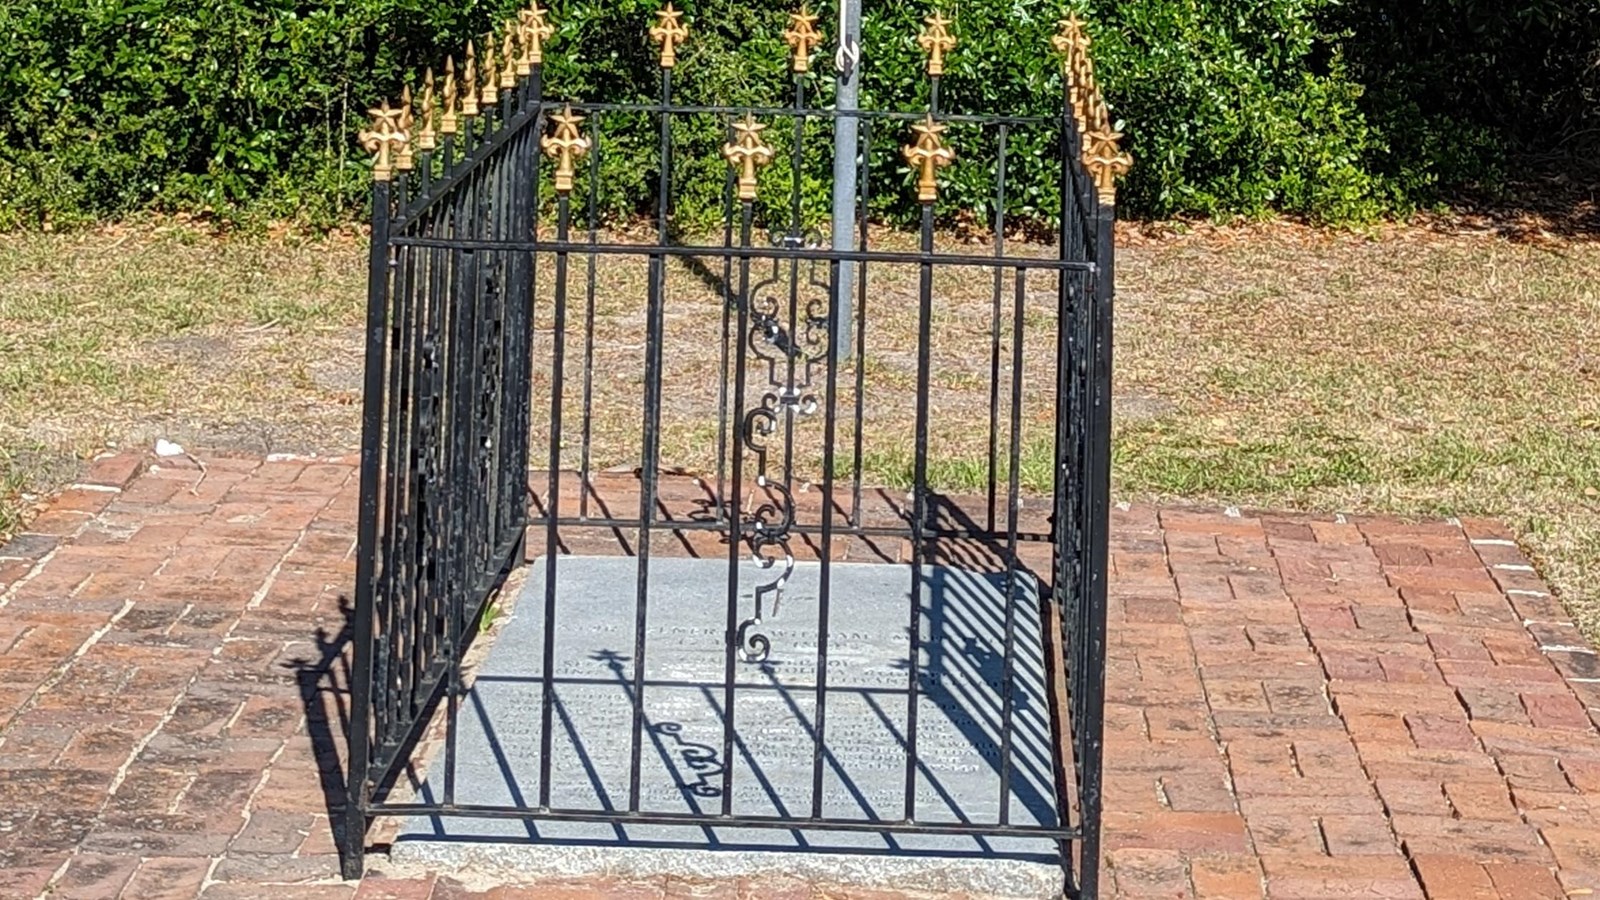 Grave of General William Moultrie